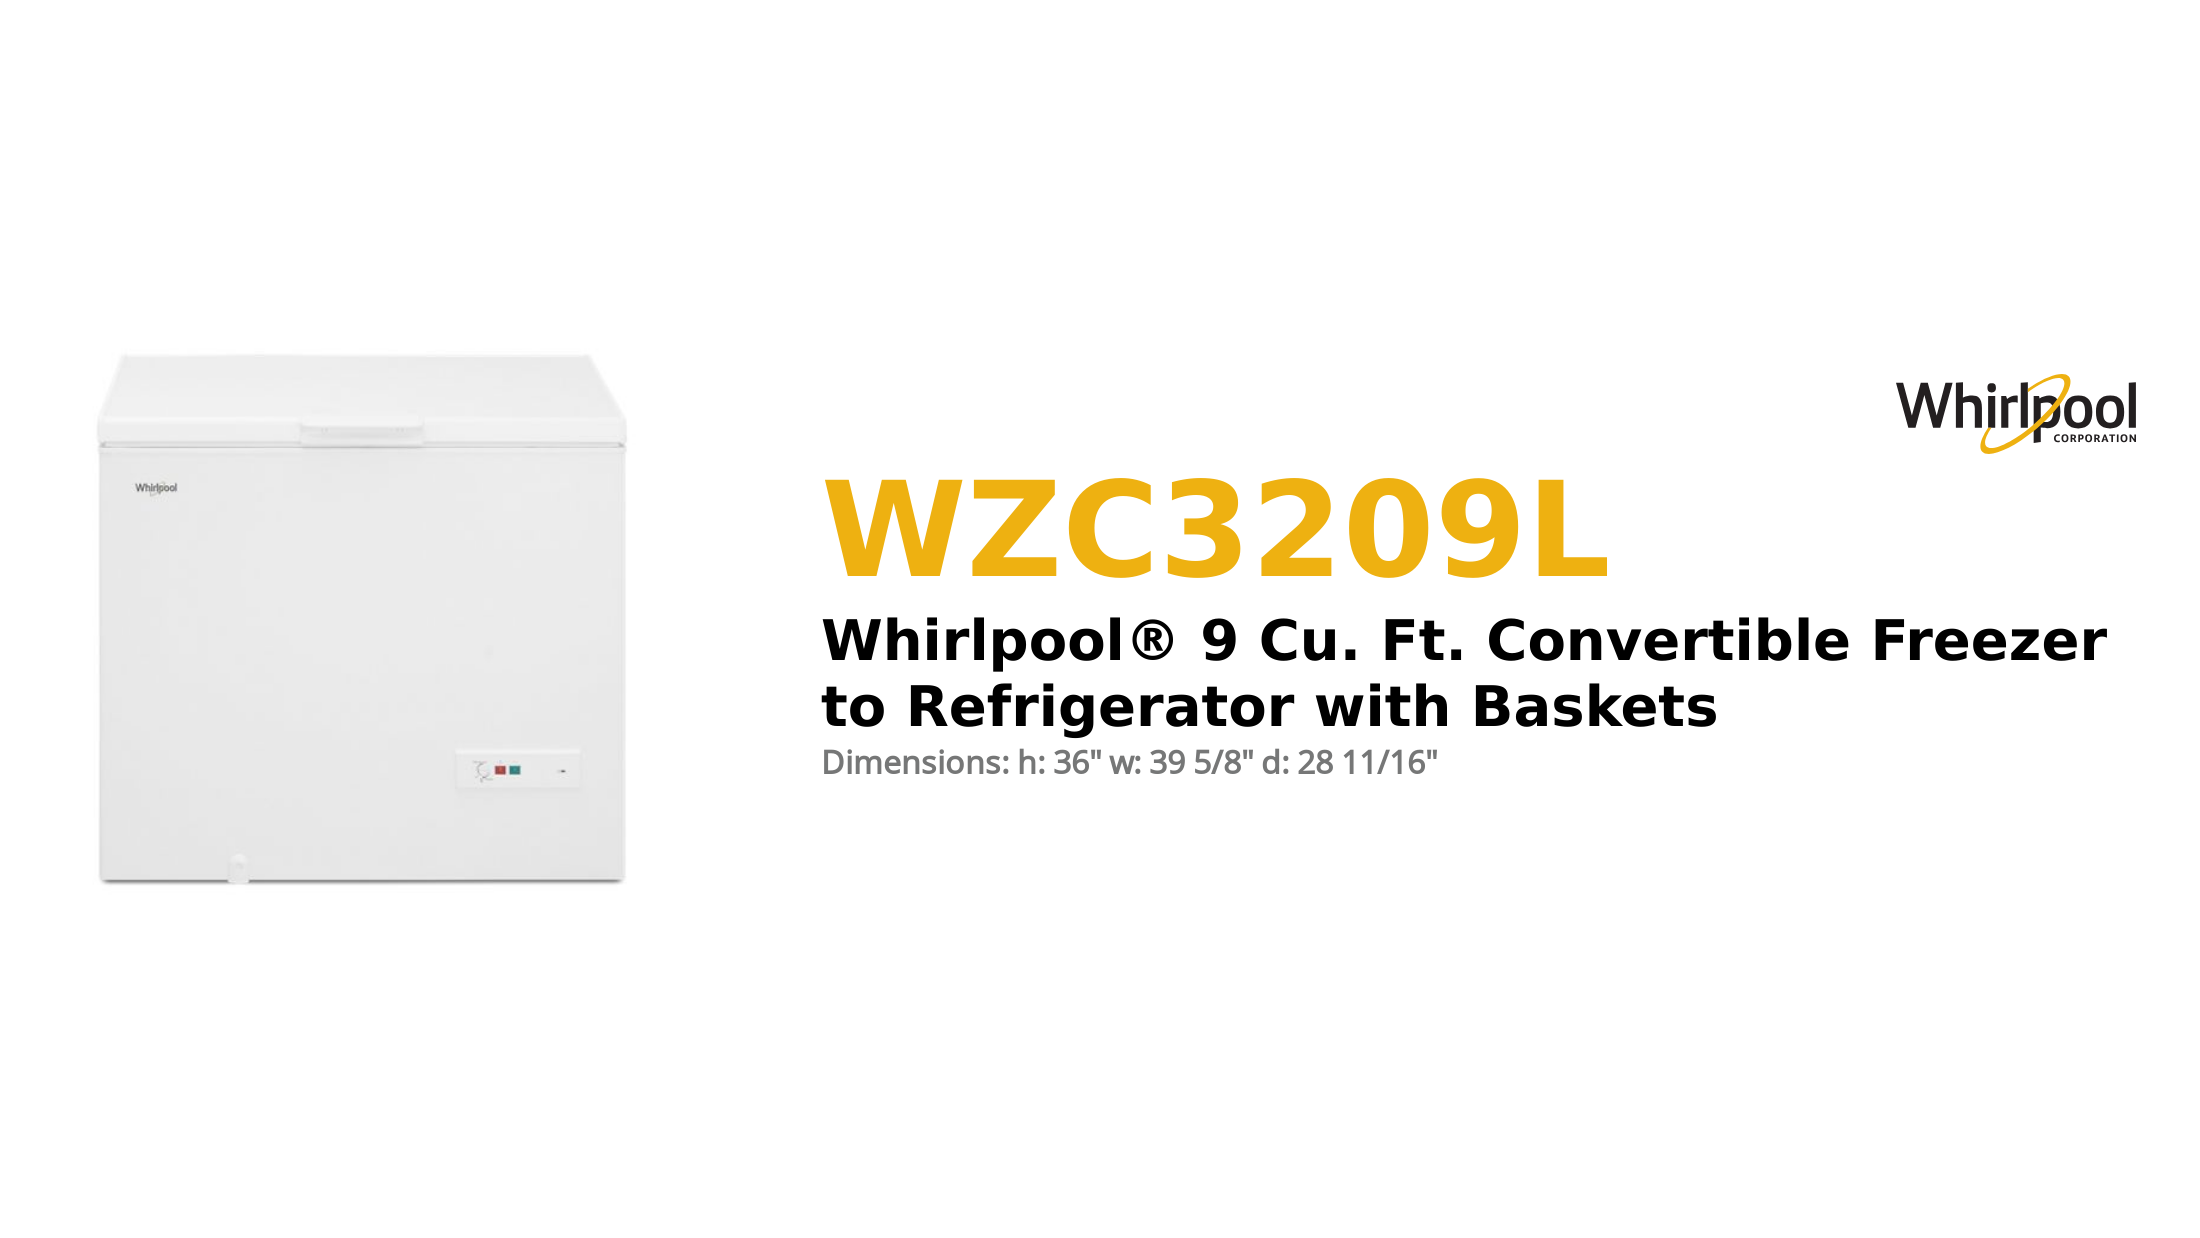 Whirlpool® 9 Cu. Ft. Convertible Freezer to Refrigerator with Baskets